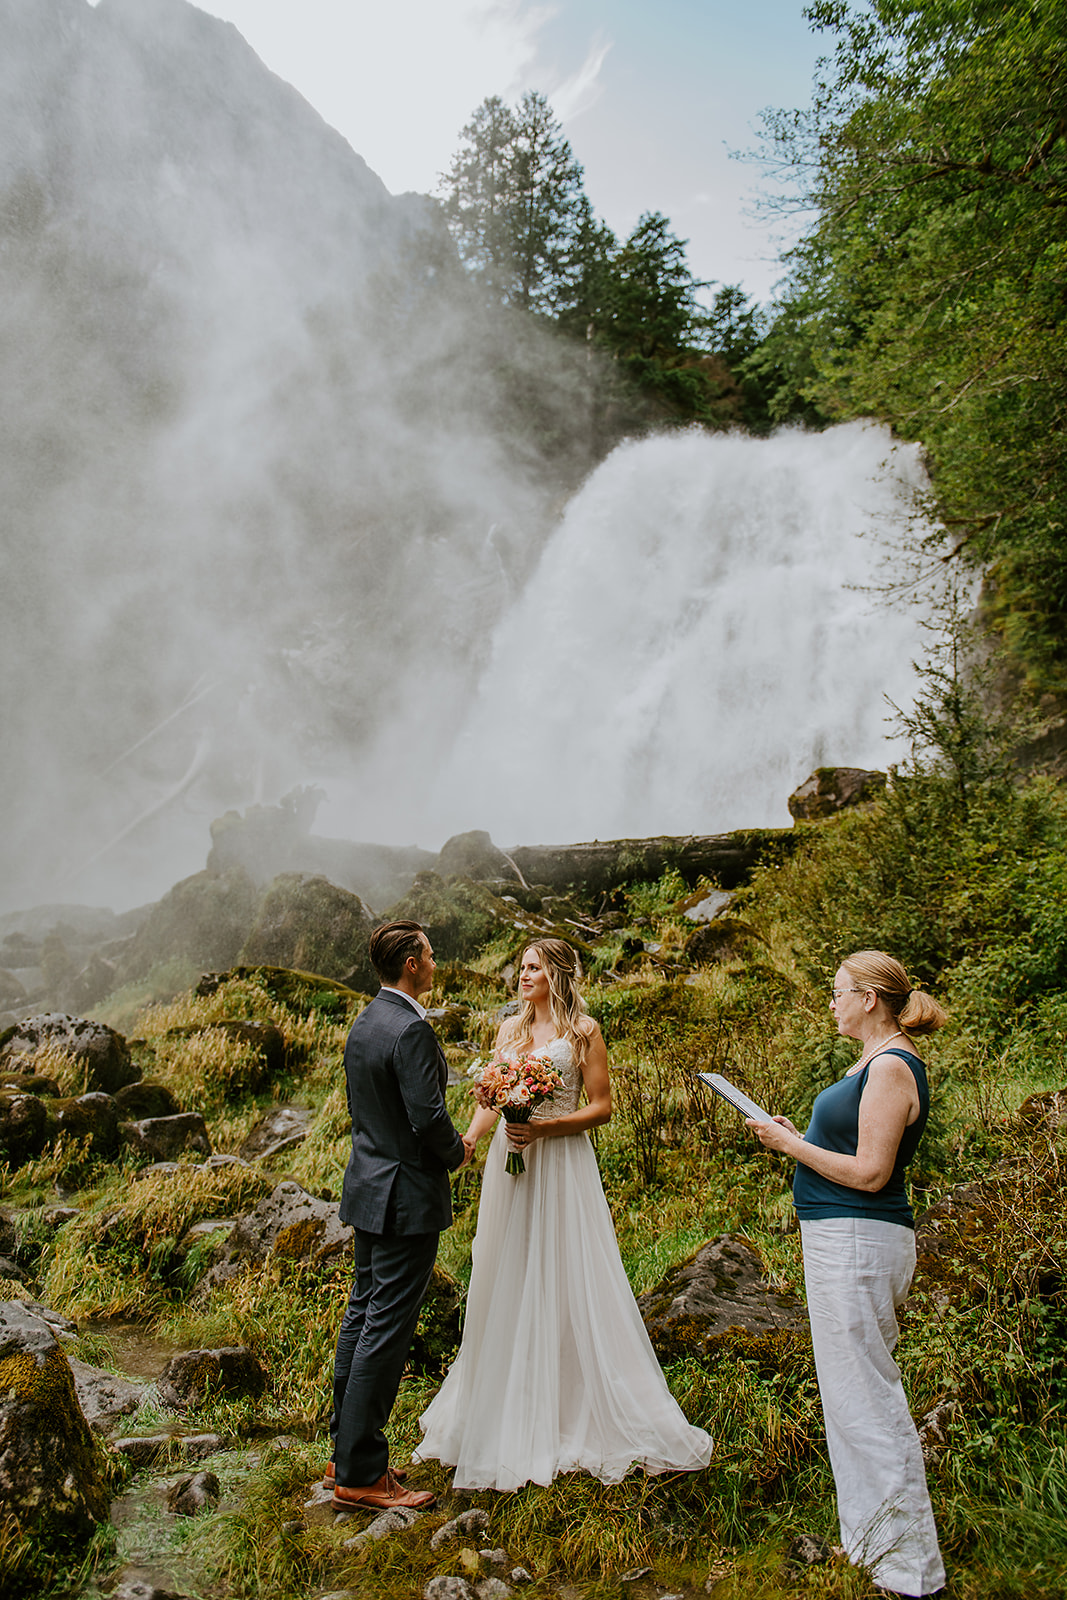 West coast wedding ceremony in front of a waterfall